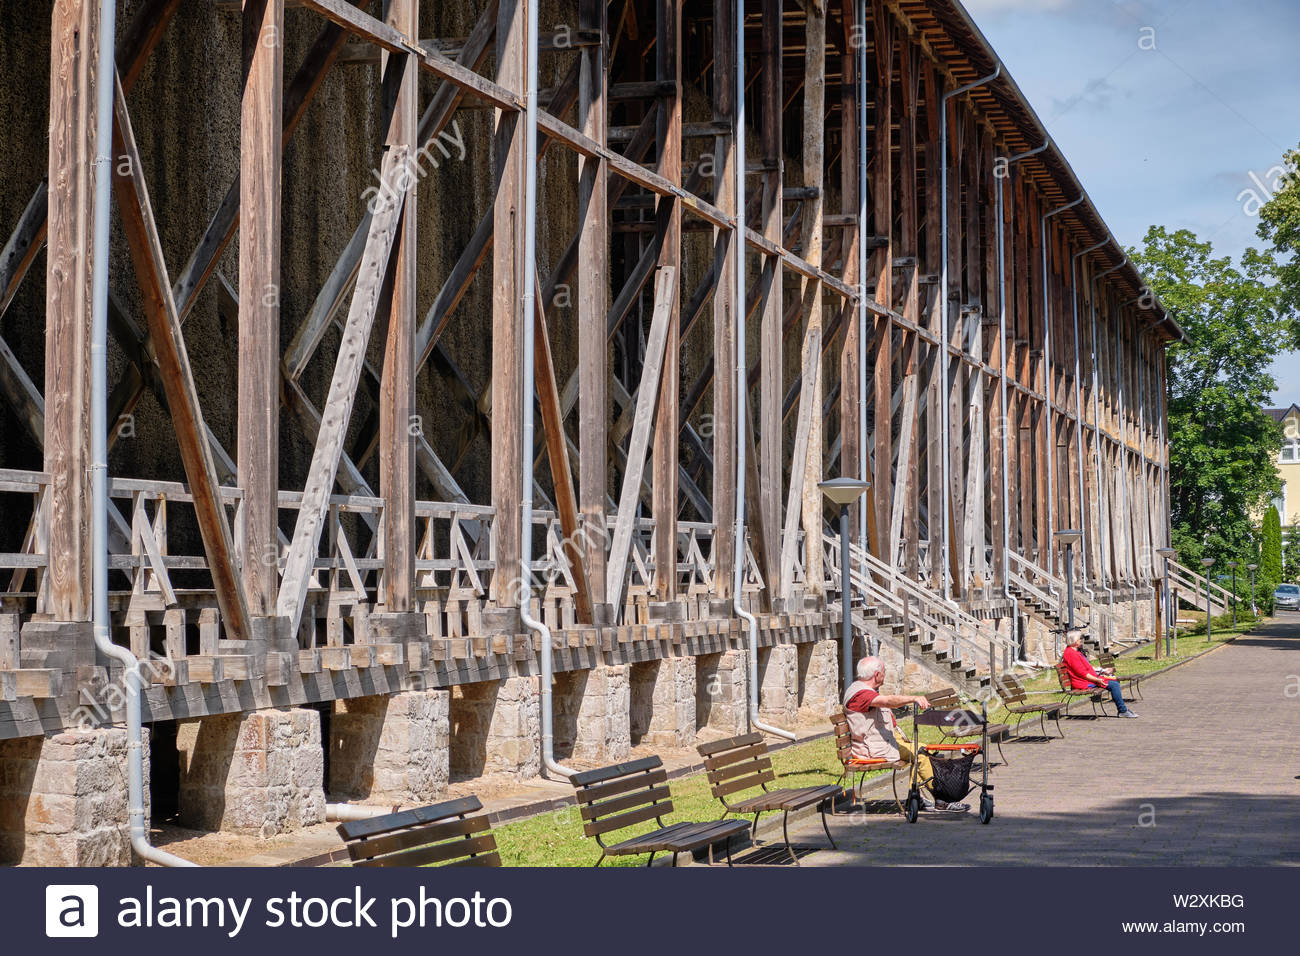 Bad Orb, Germany - July 10, 2019: The graduation tower in the spa ...